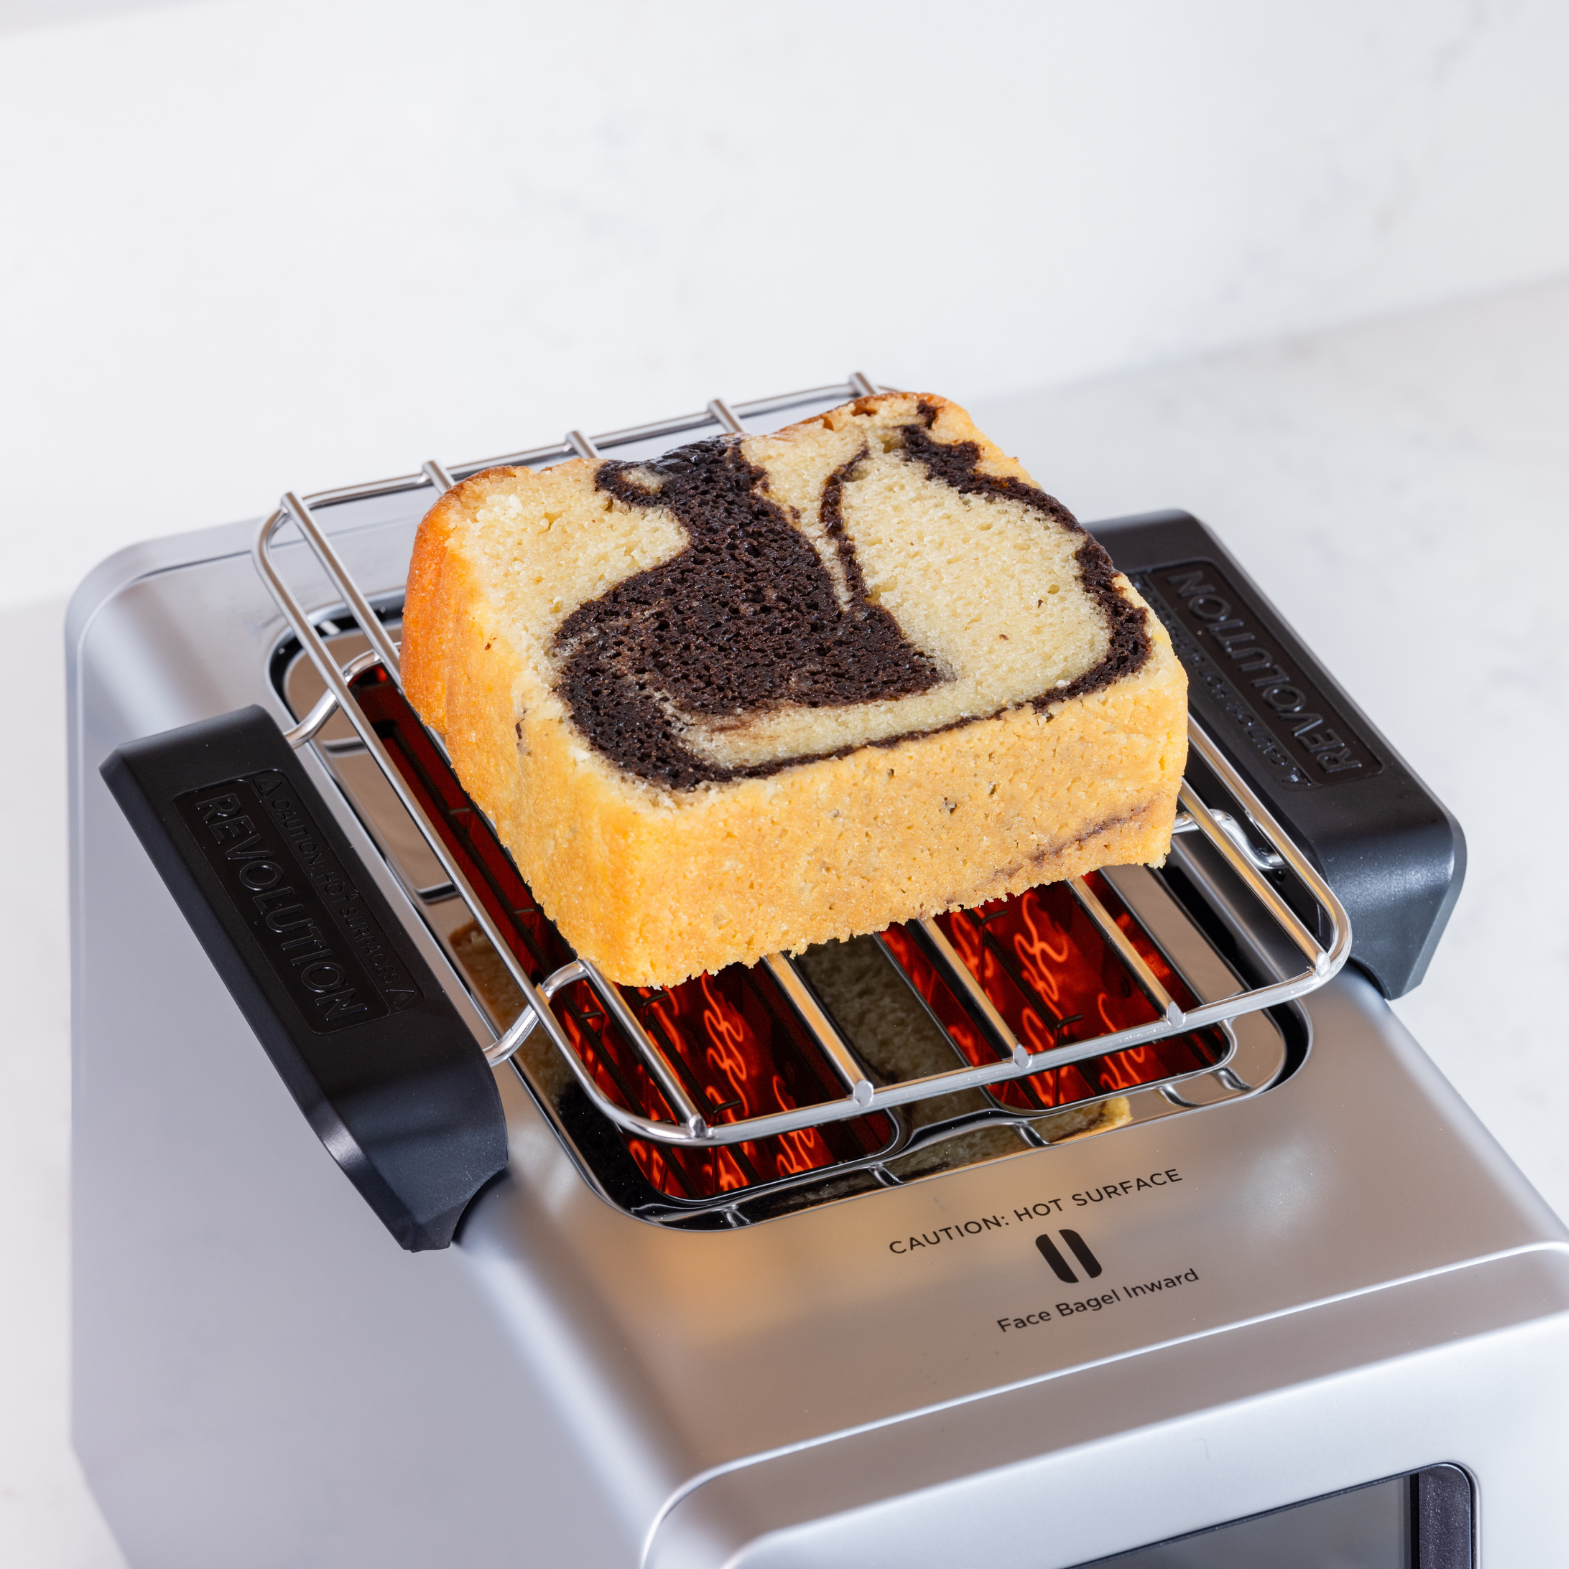 This toaster costs $270 and it makes only one piece of toast at a time!